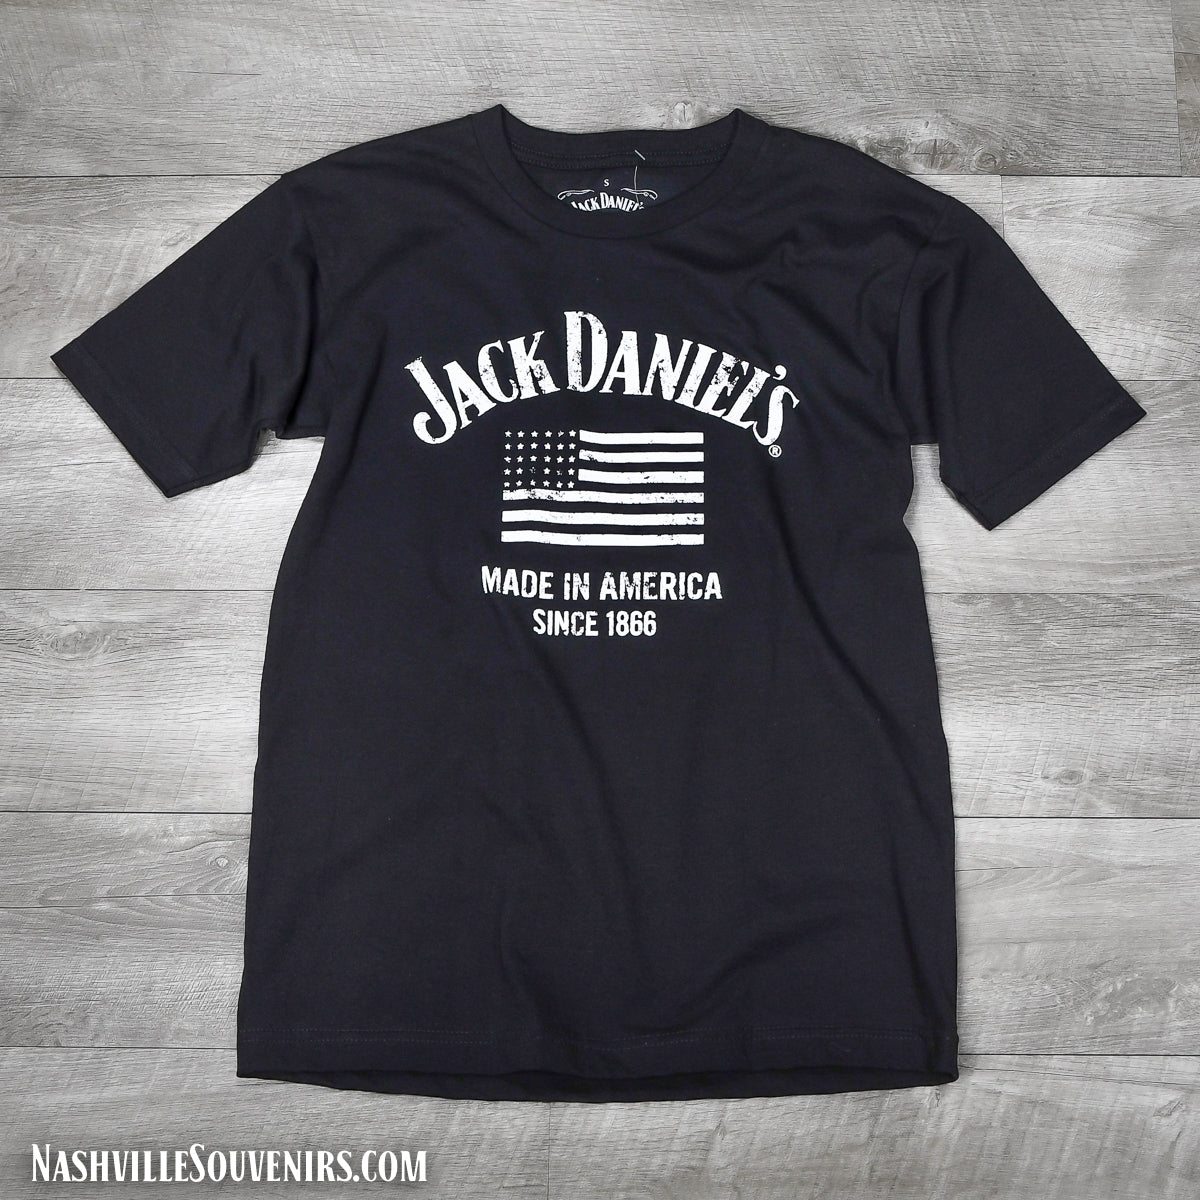 Officially licensed Jack Daniels Made in America T-shirt. Salutes the iconic Jack Daniels Tennessee Whiskey brand. Get yours today with FREE SHIPPING on all US orders over $75!